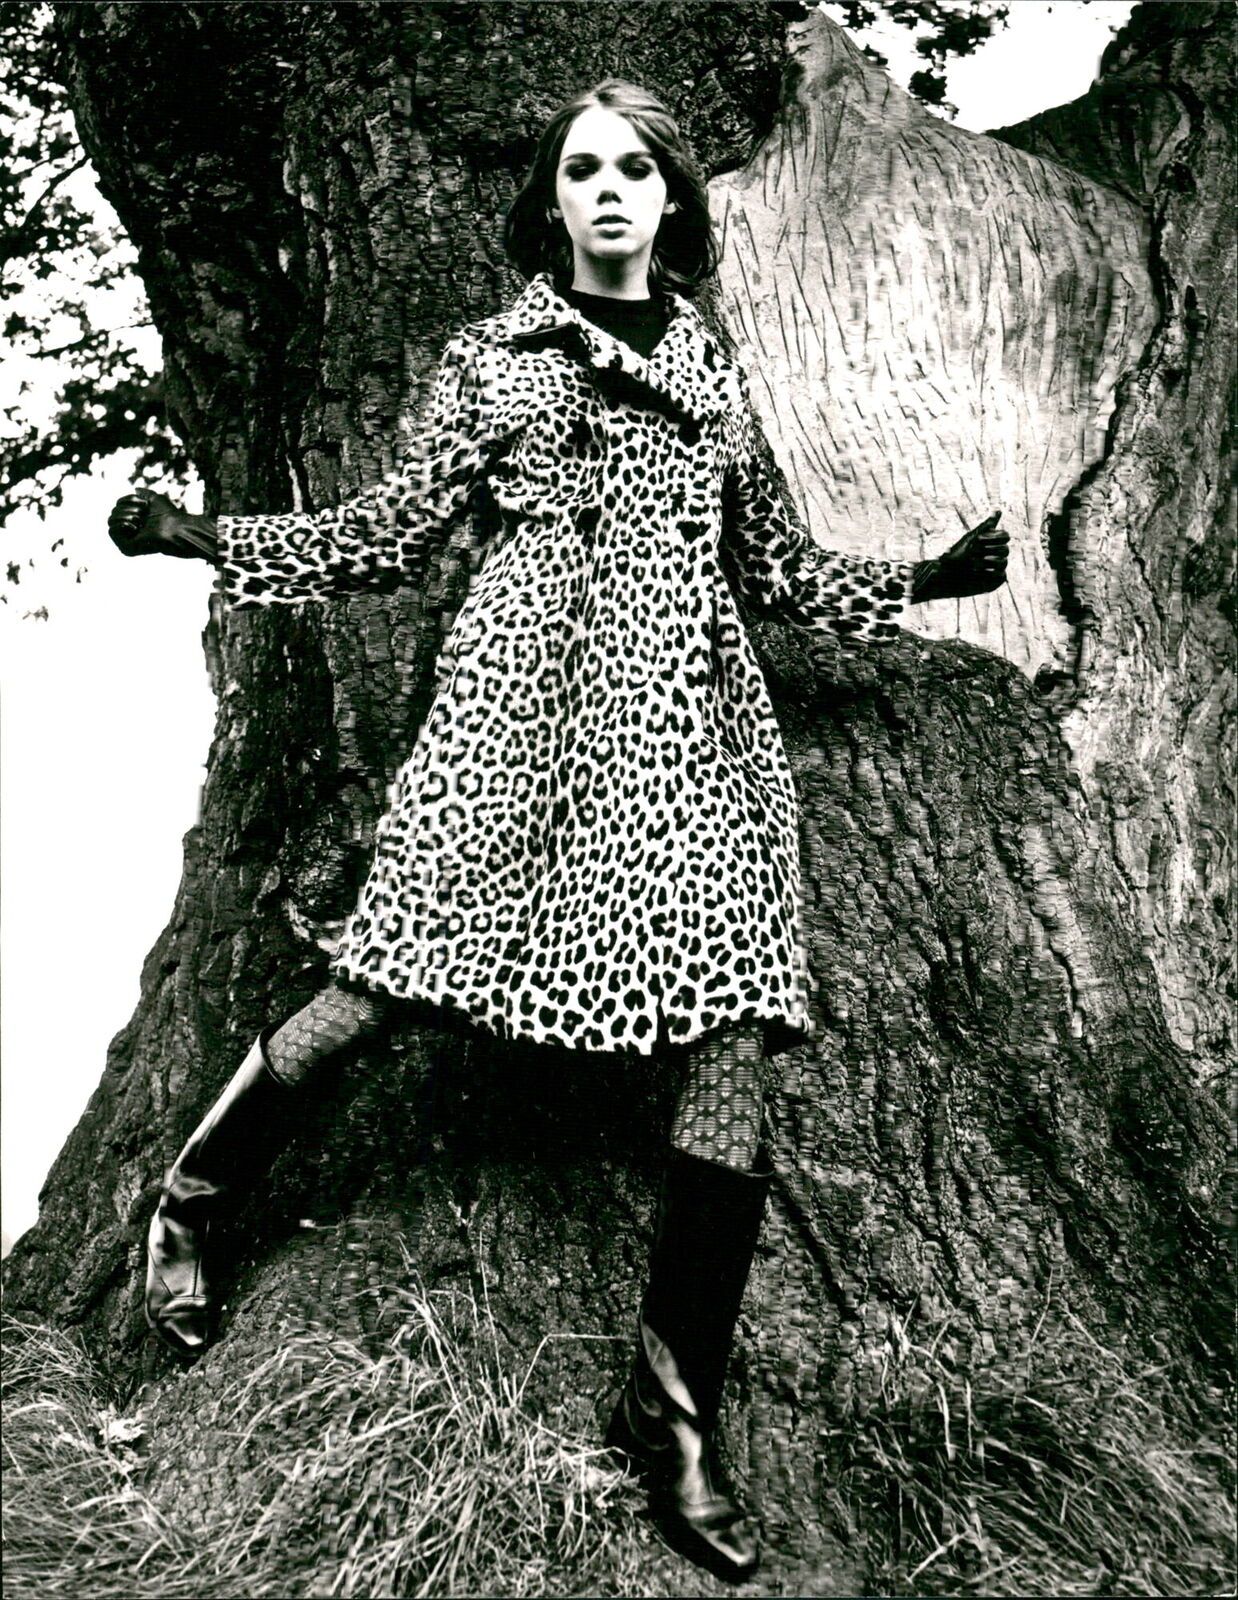 Coat of Somalile Leopard for 1960s Fashion - Vintage Photograph 2600793